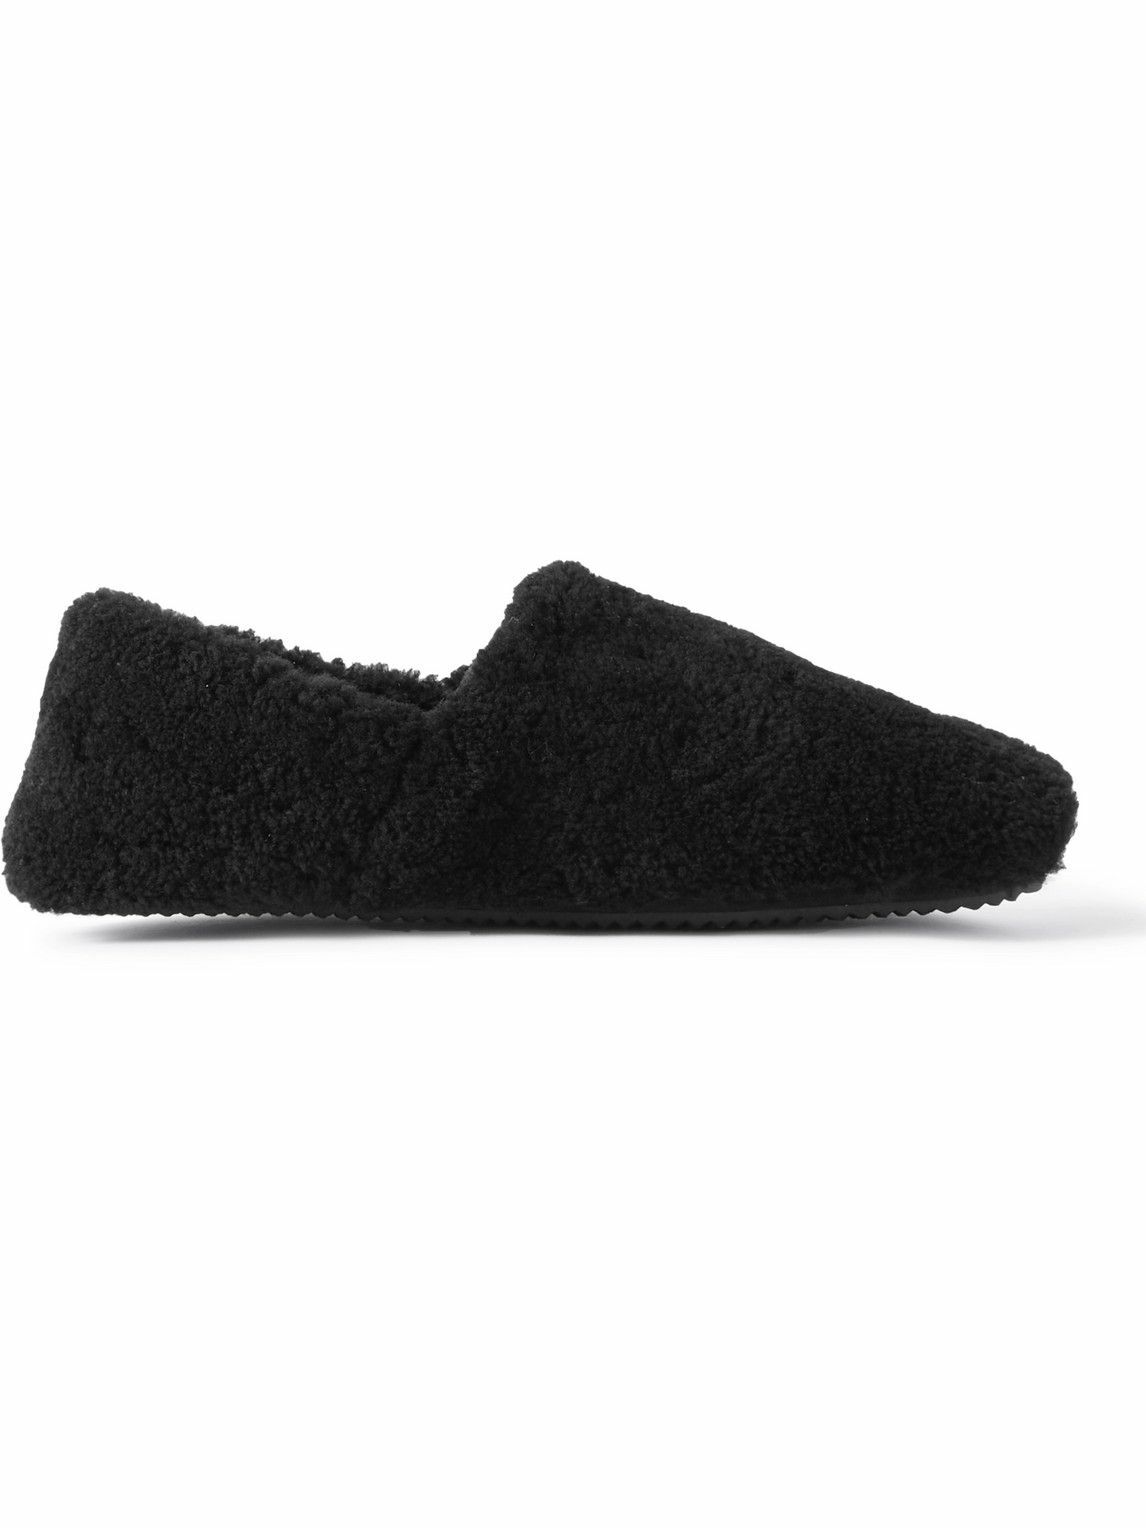 Mr P. - Leather-Trimmed Shearling Slippers - Black Mr P.